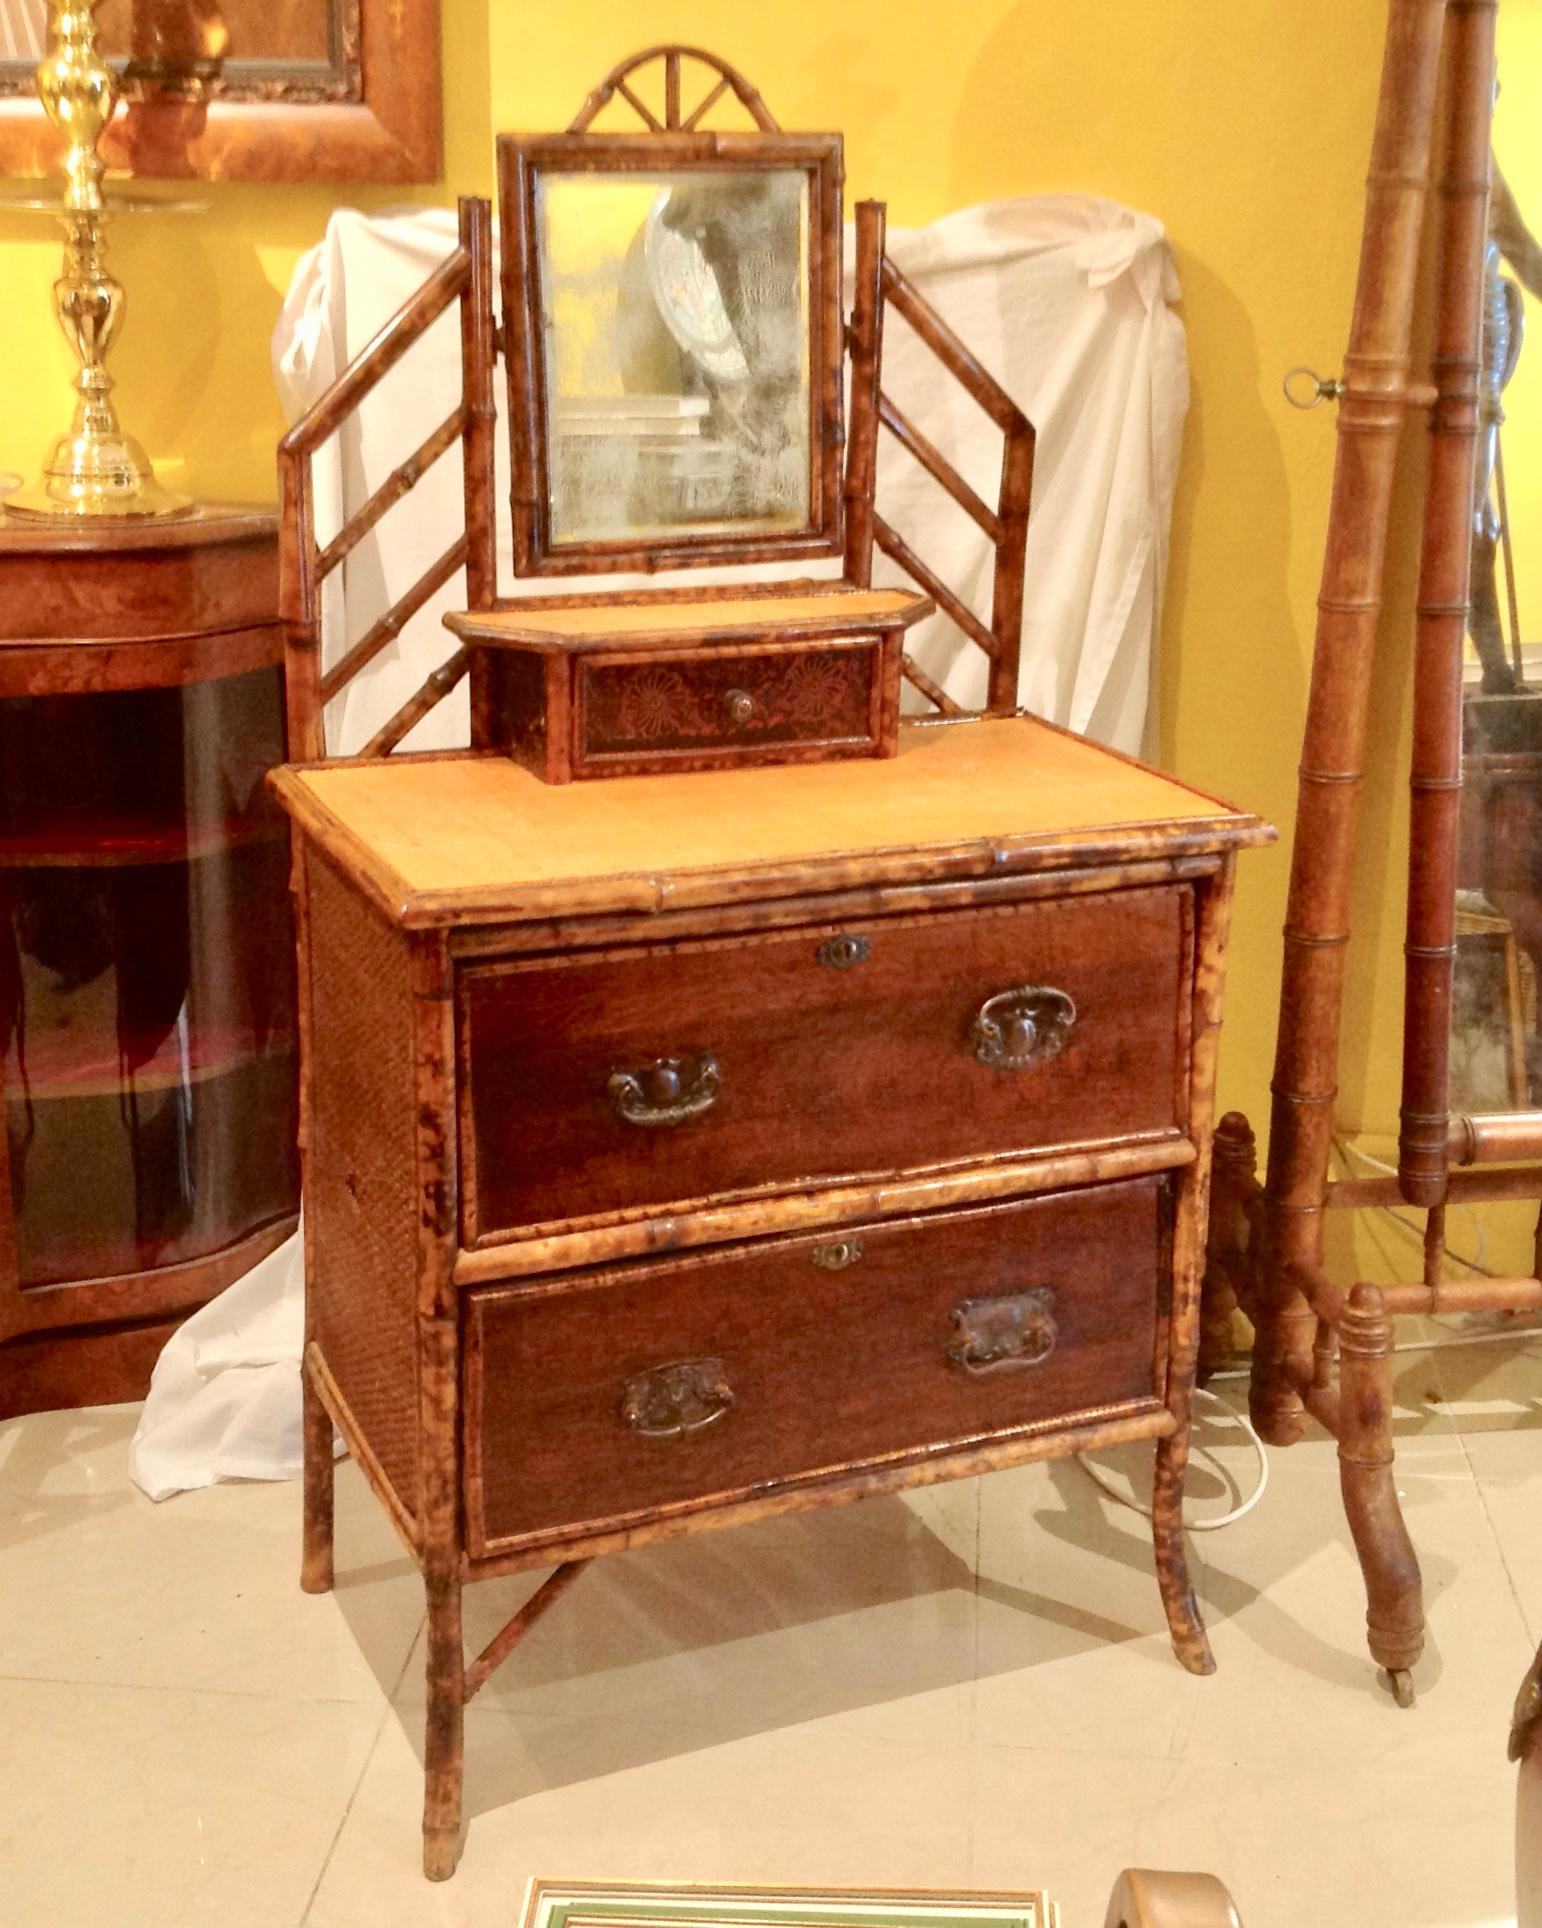 A charming dresser of small proportions with good detail around the mirror.